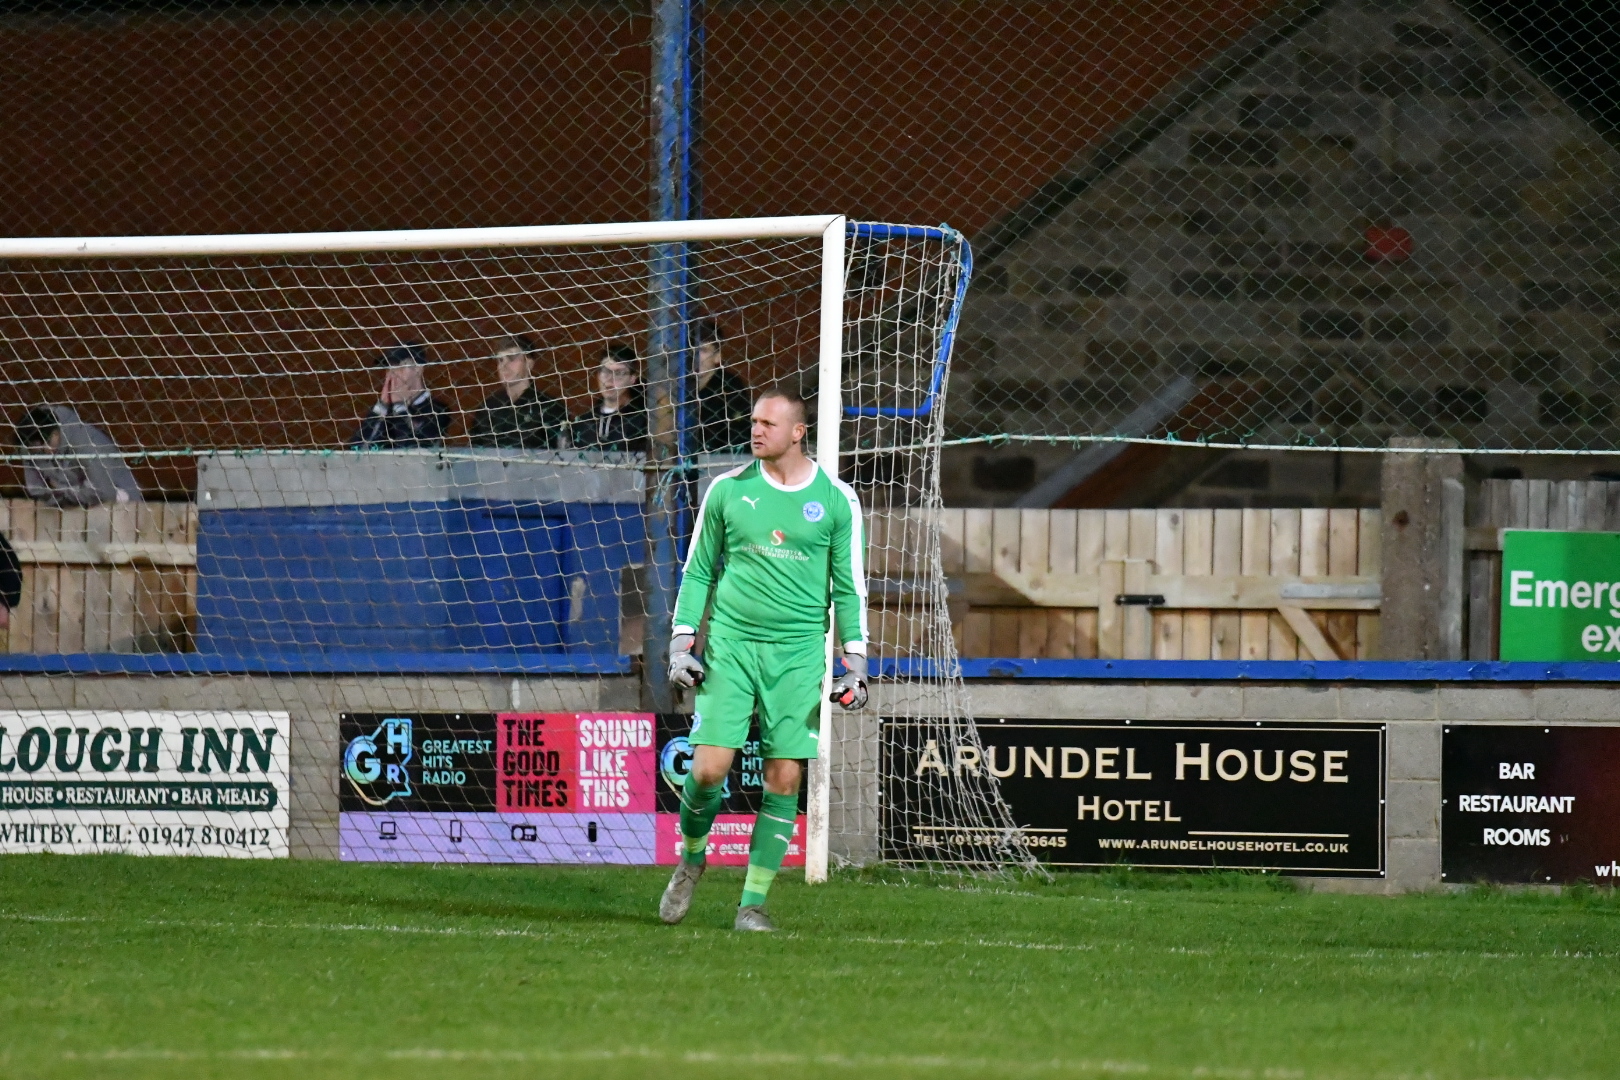 Graeme McCall has been a mainstay between the sticks for Blues. Picture by Mark Percy